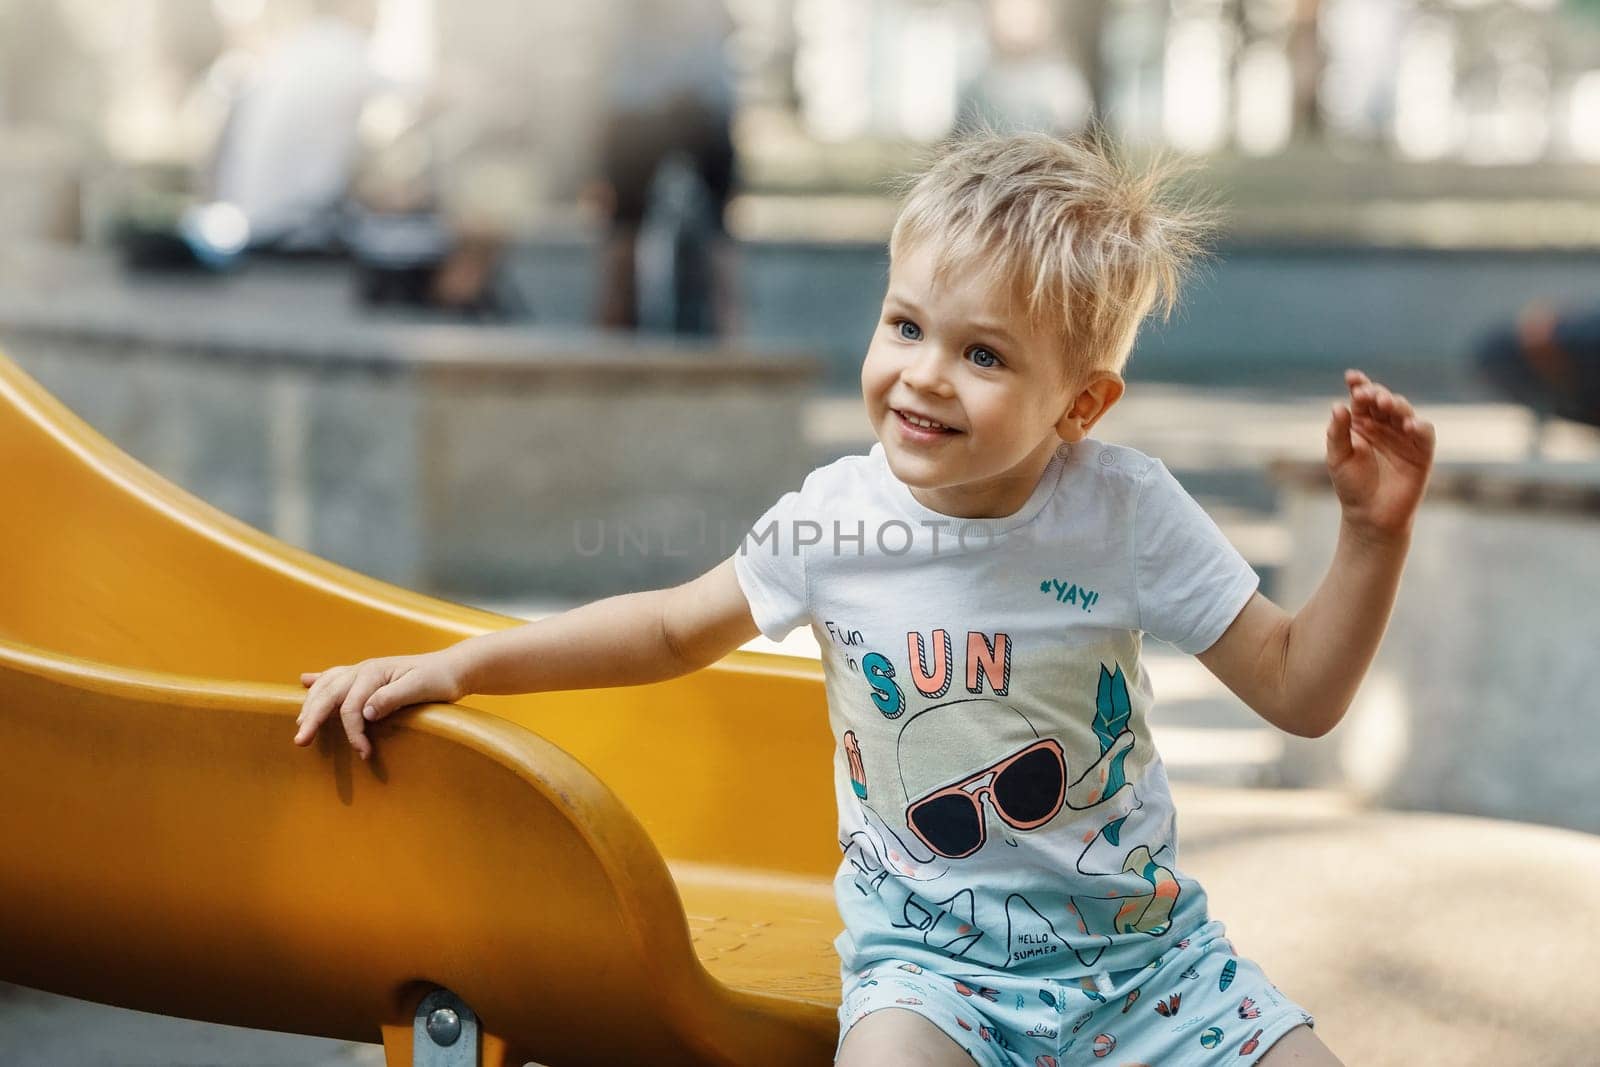 A cheerful, smiling, likeable little boy on the playground on a yellow slider. The child's hair is electrified and bristling by Lincikas